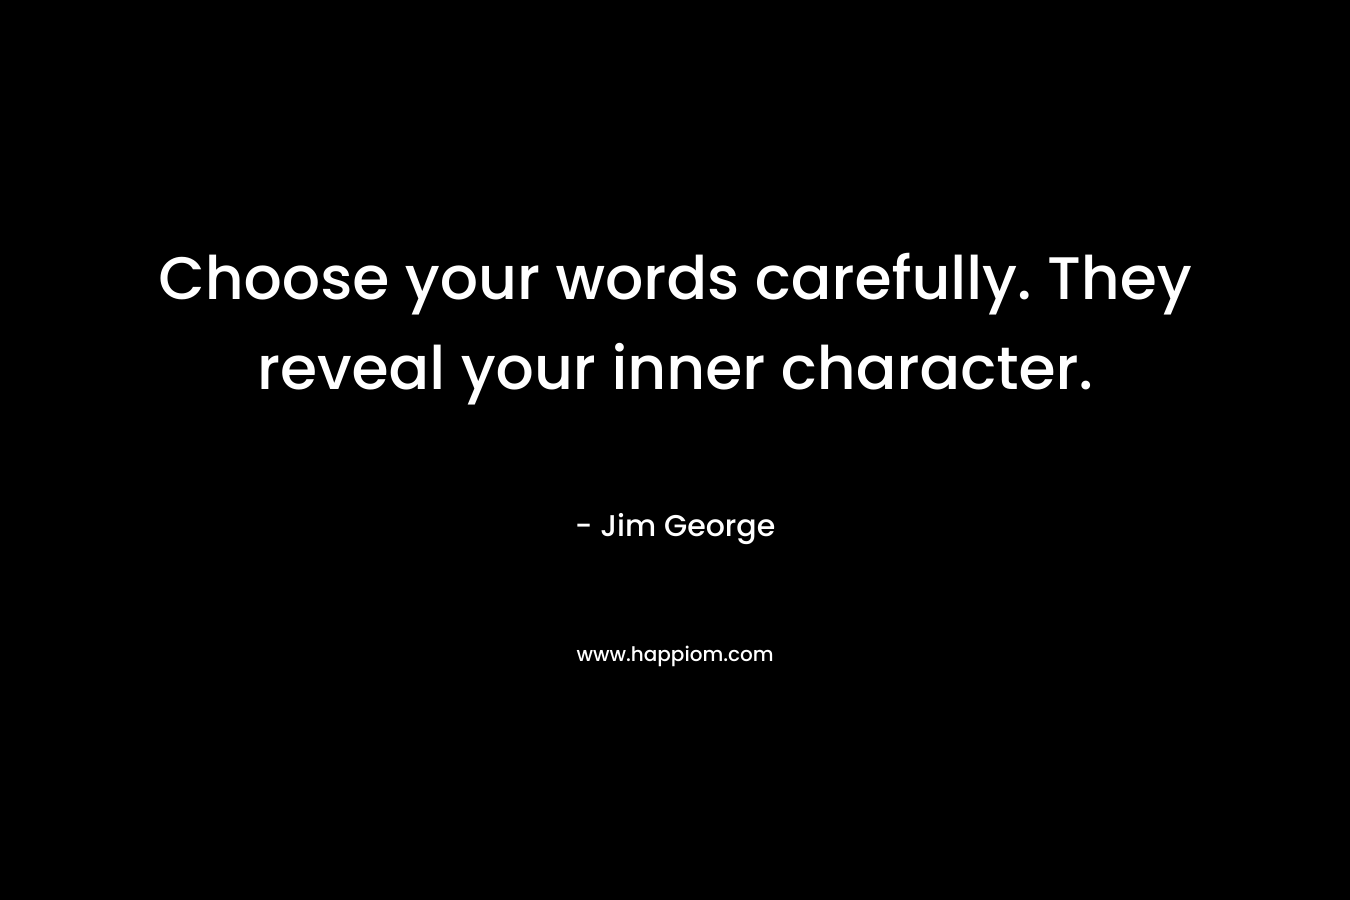 Choose your words carefully. They reveal your inner character.